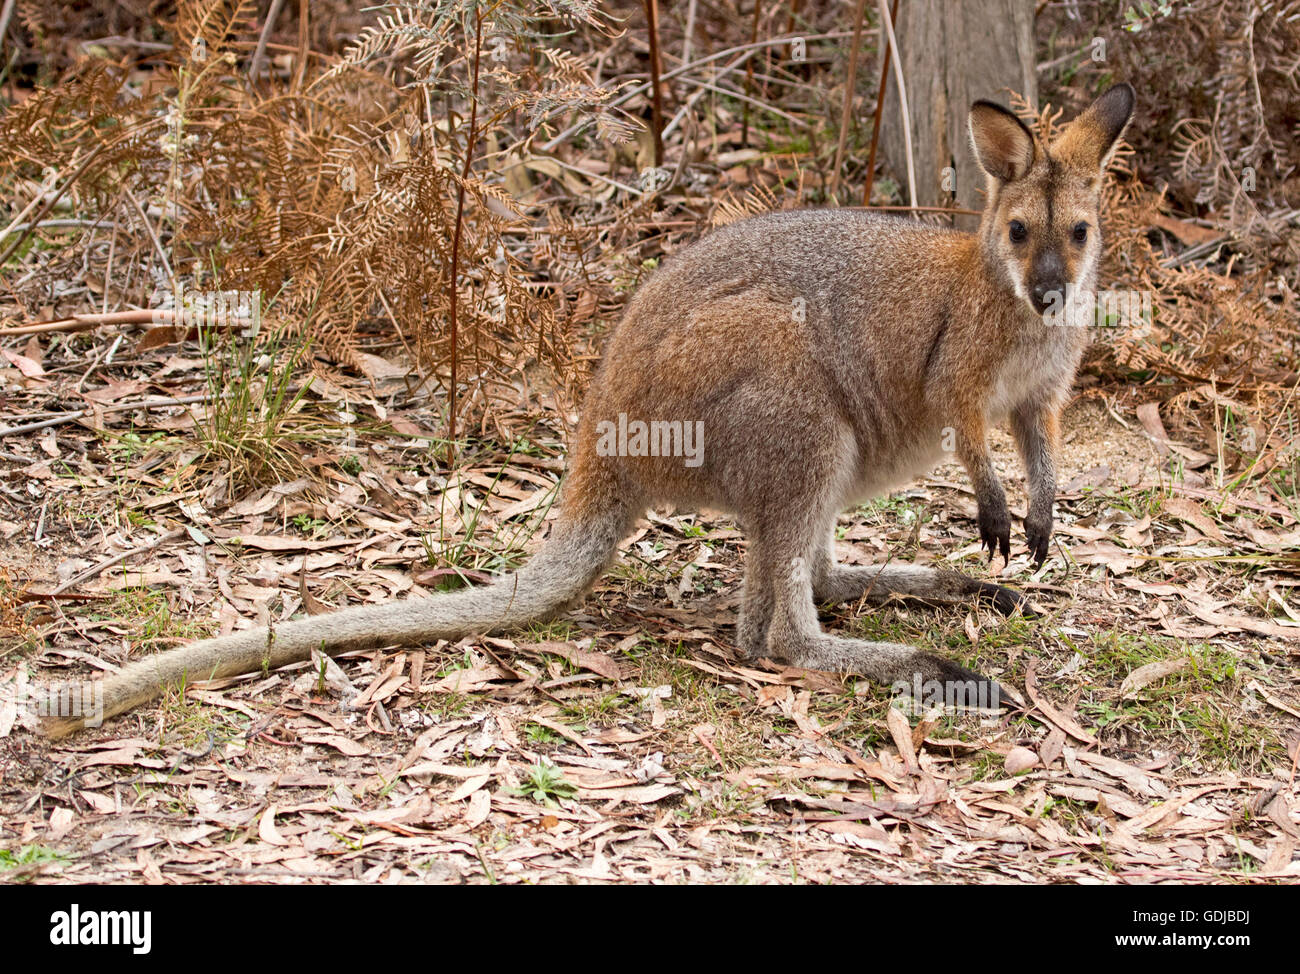 Beautiful red-necked / Bennett's wallaby Macropus rufogriseus in the wild on edge of forest looking at camera with alert expression, Wollemi Nat Park Stock Photo